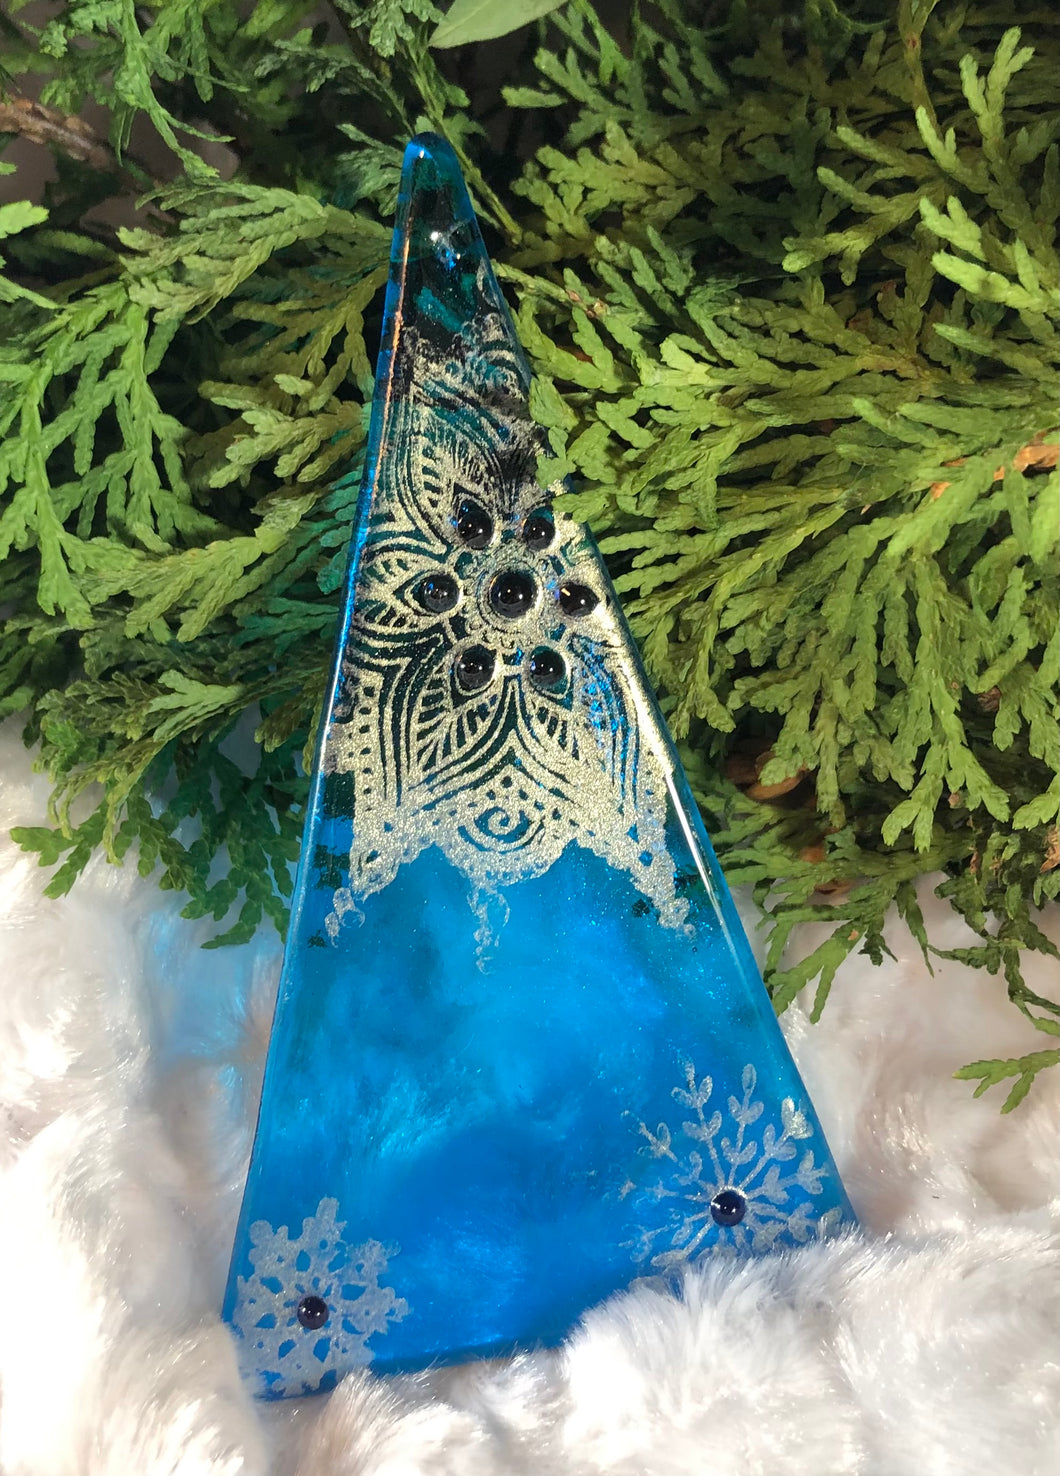 Holiday Ornaments - Turquoise / Mica / Embellished